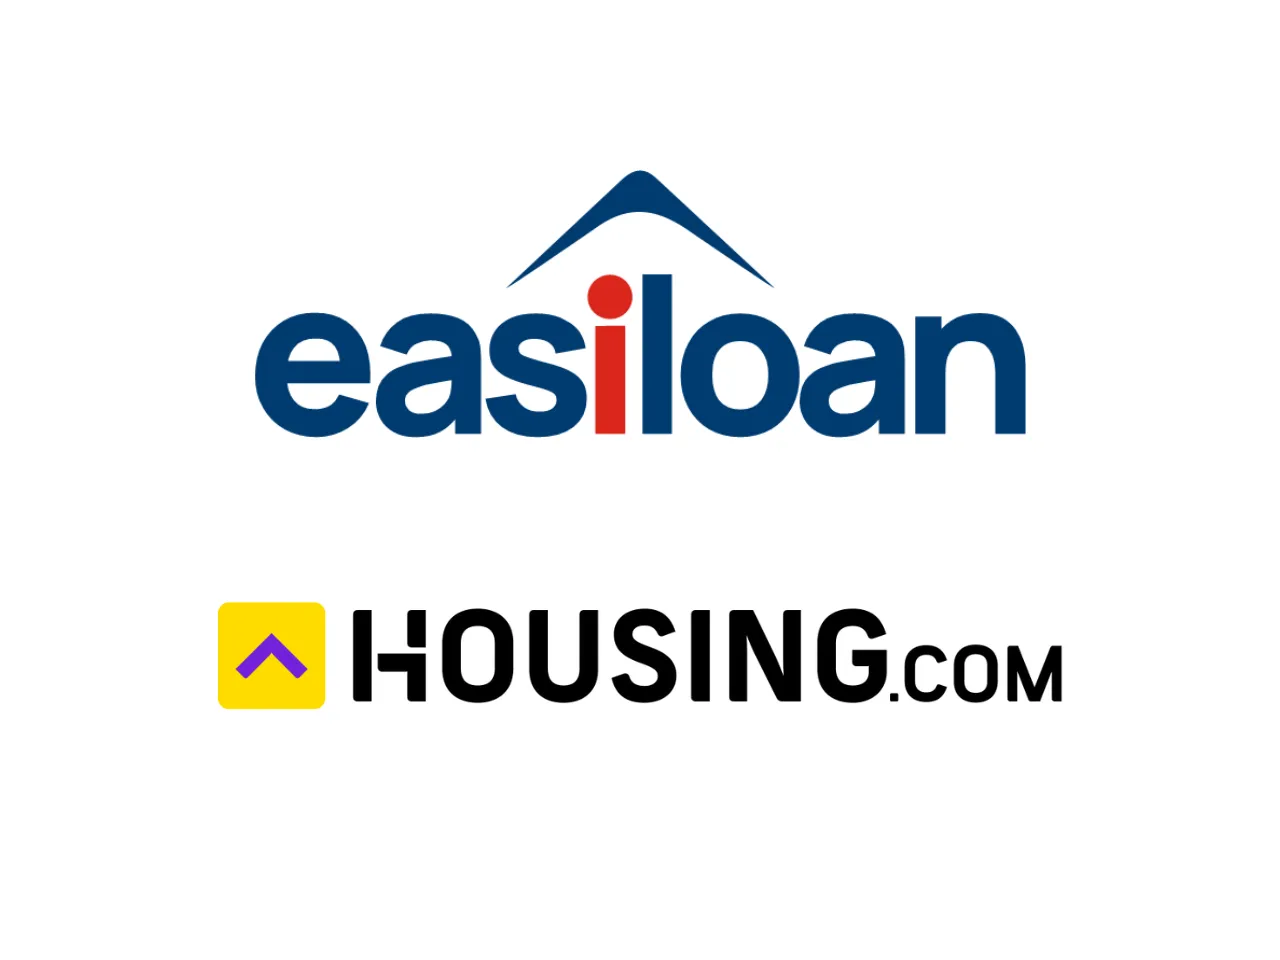  Housing.com to invest in fintech startup Easiloan